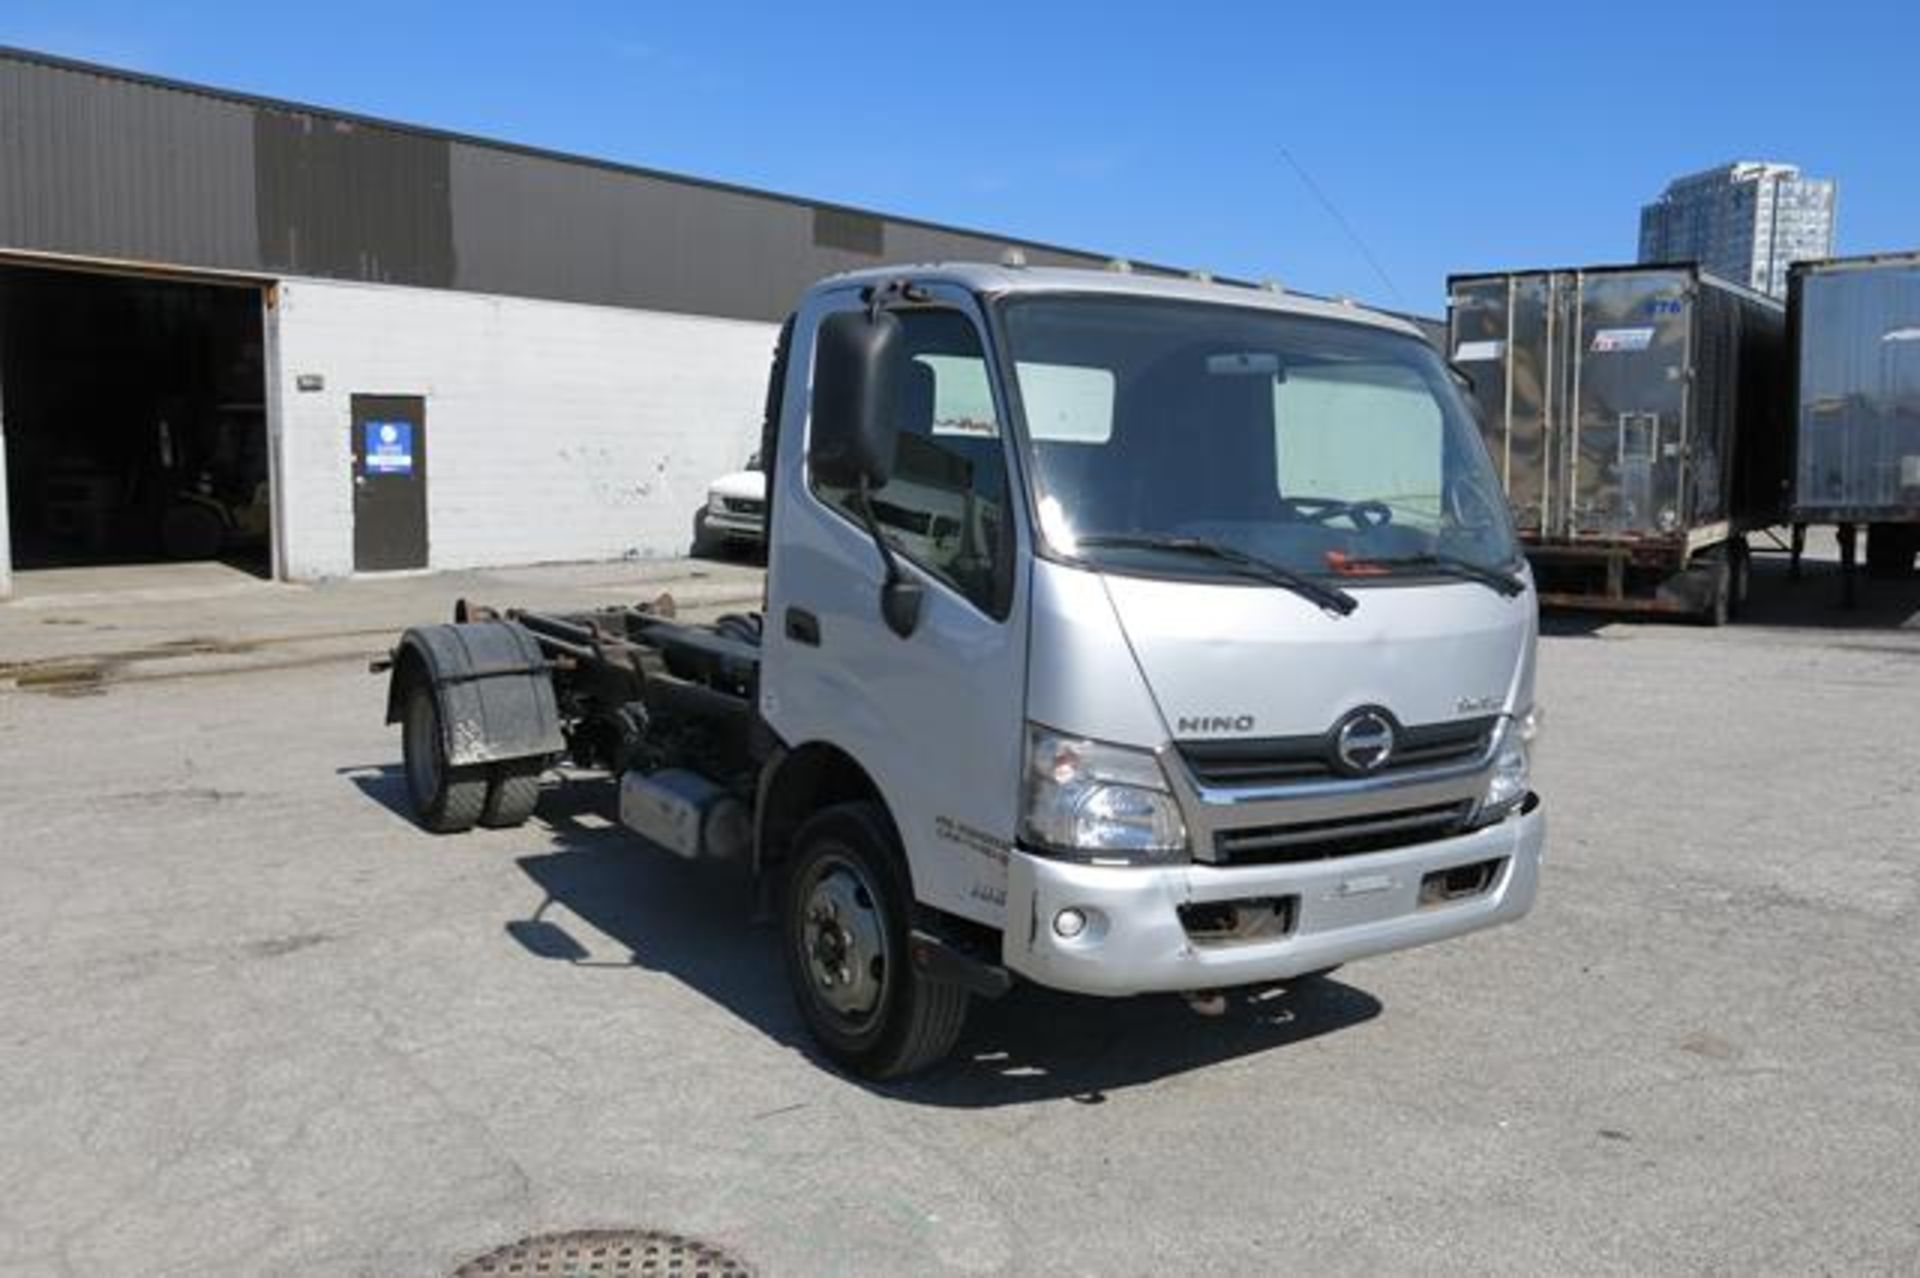 HINO, 195, WITH HIAB, 5 TON, HOOK LIFT, DIESEL ENGINE, AIR CONDITIONING, AUTOMATIC TRANSMISSION, - Image 2 of 35